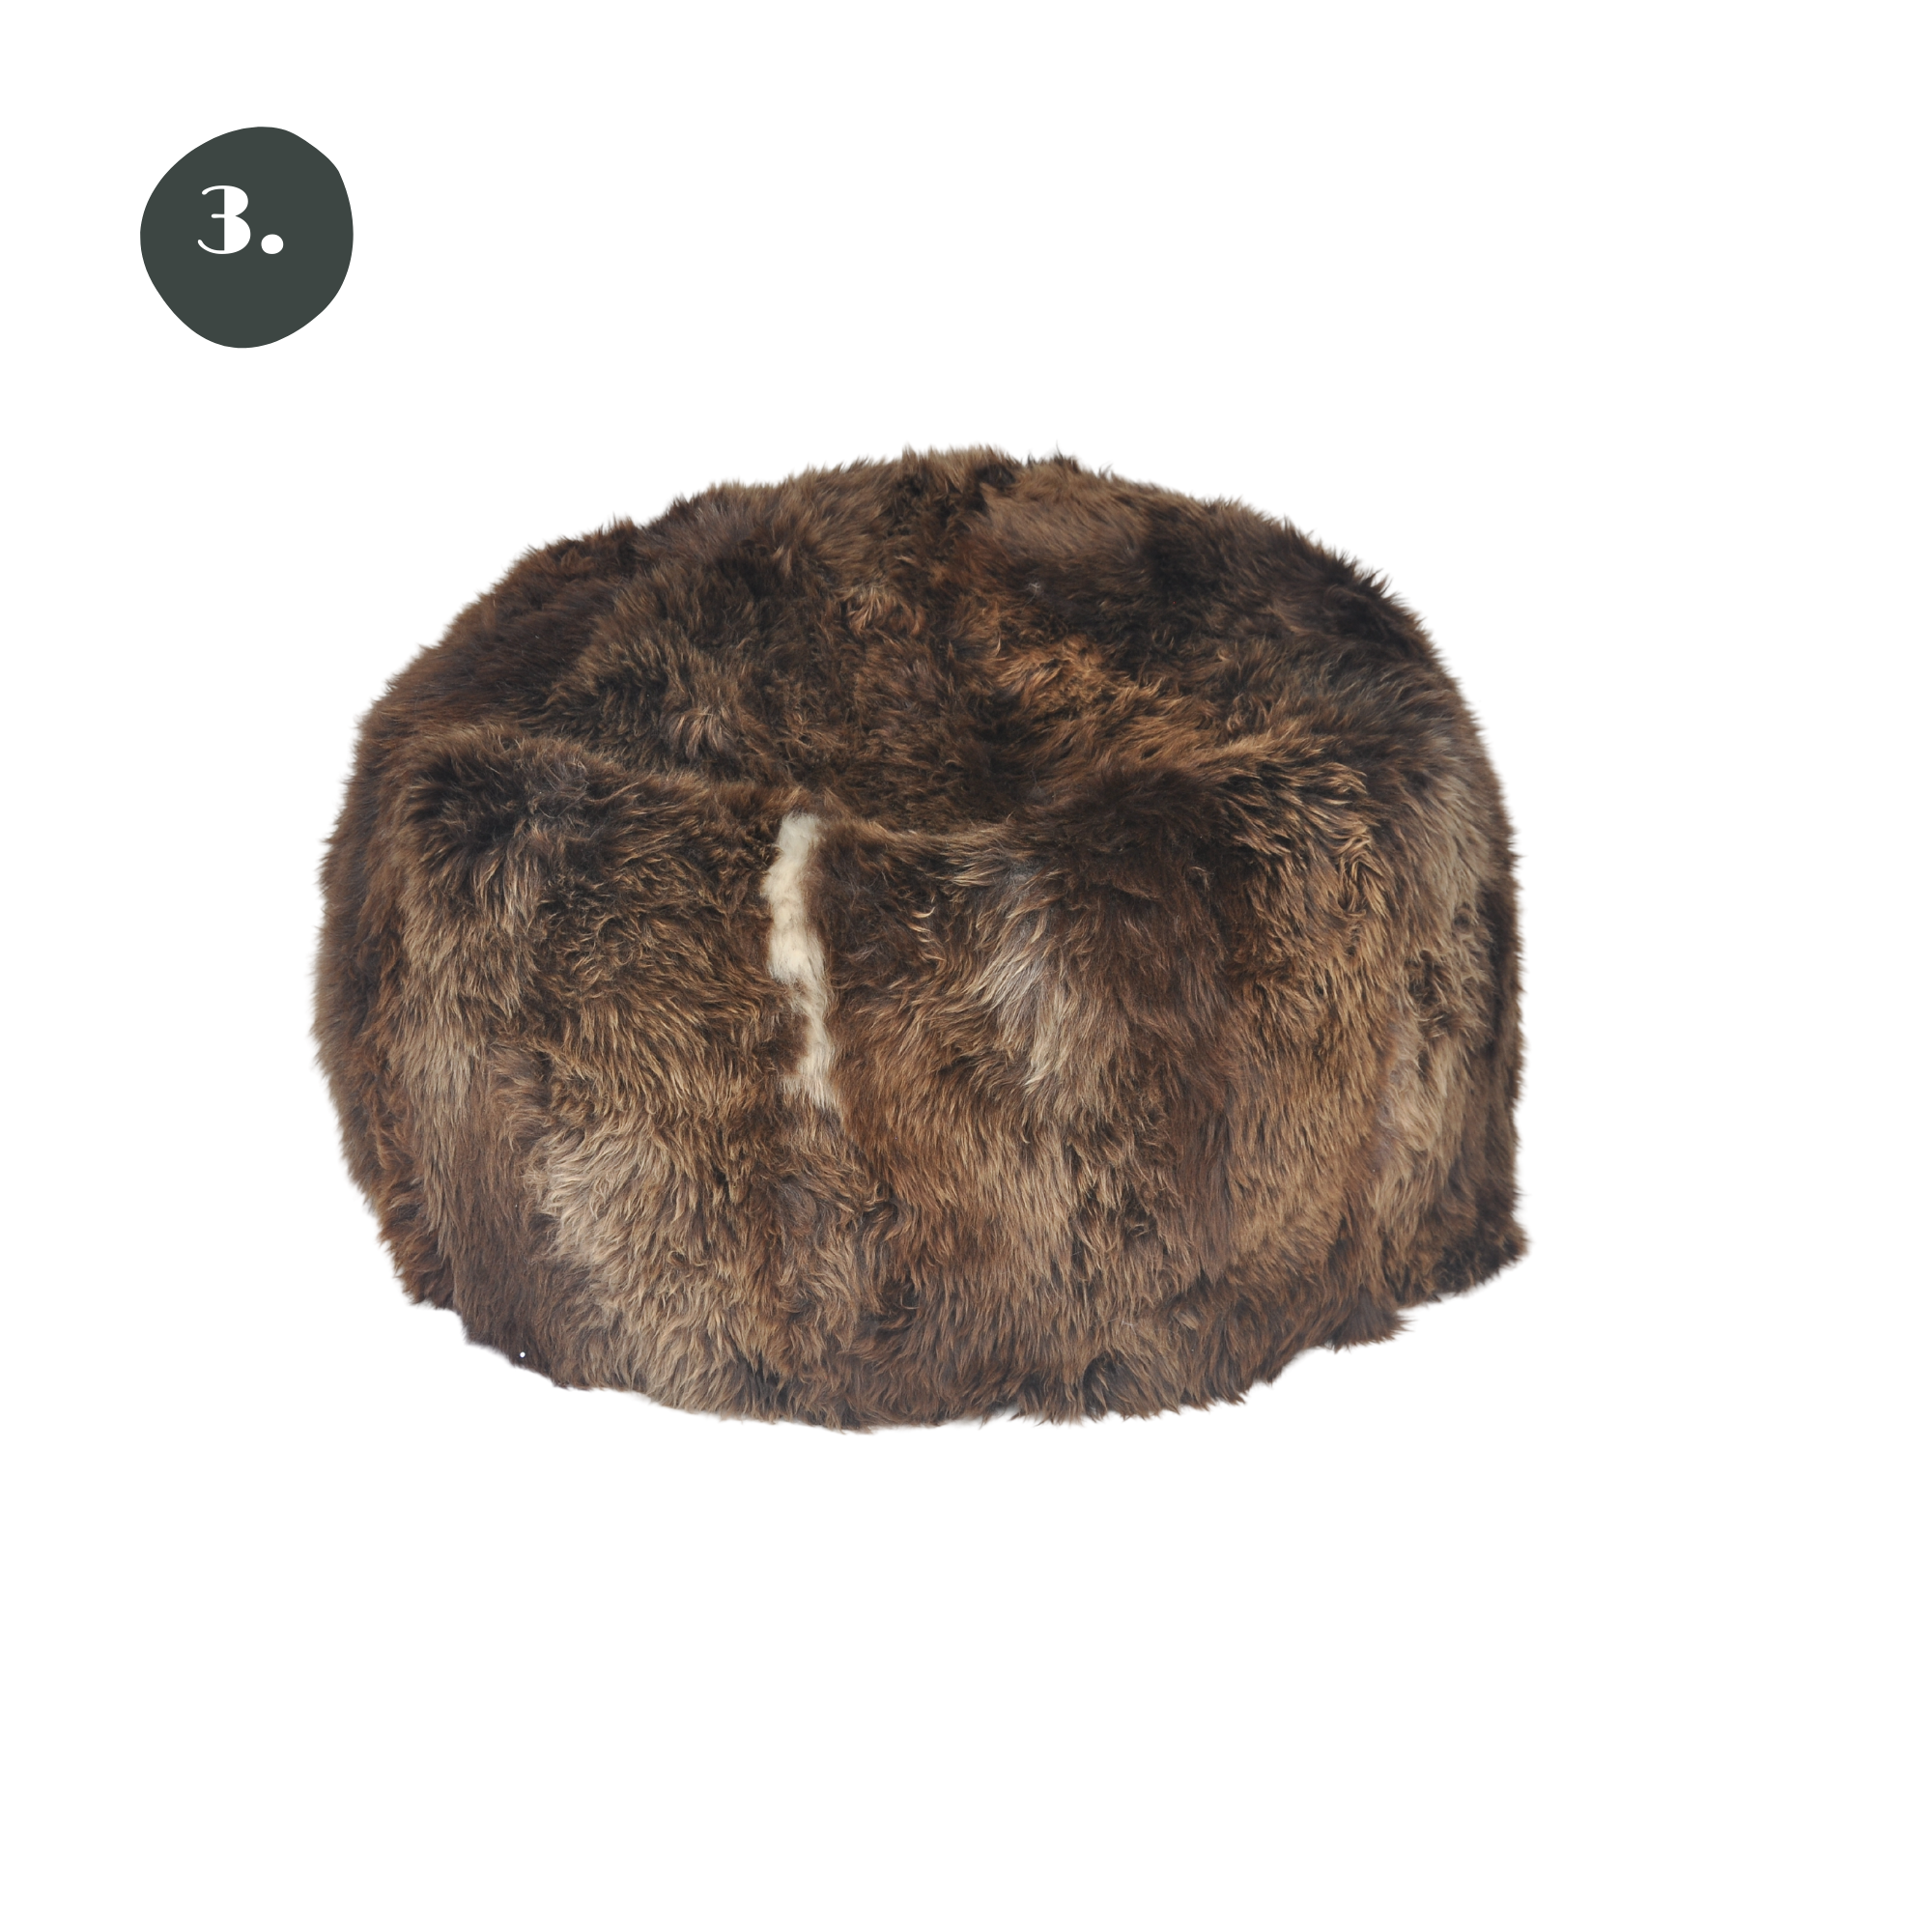 Long Wool Sheepskin Bean Bag • Natural Brown #3. Chocolate brown wool with a hint of lighter tan  highlights throughout the wool pile and a cream thread in the middle.  